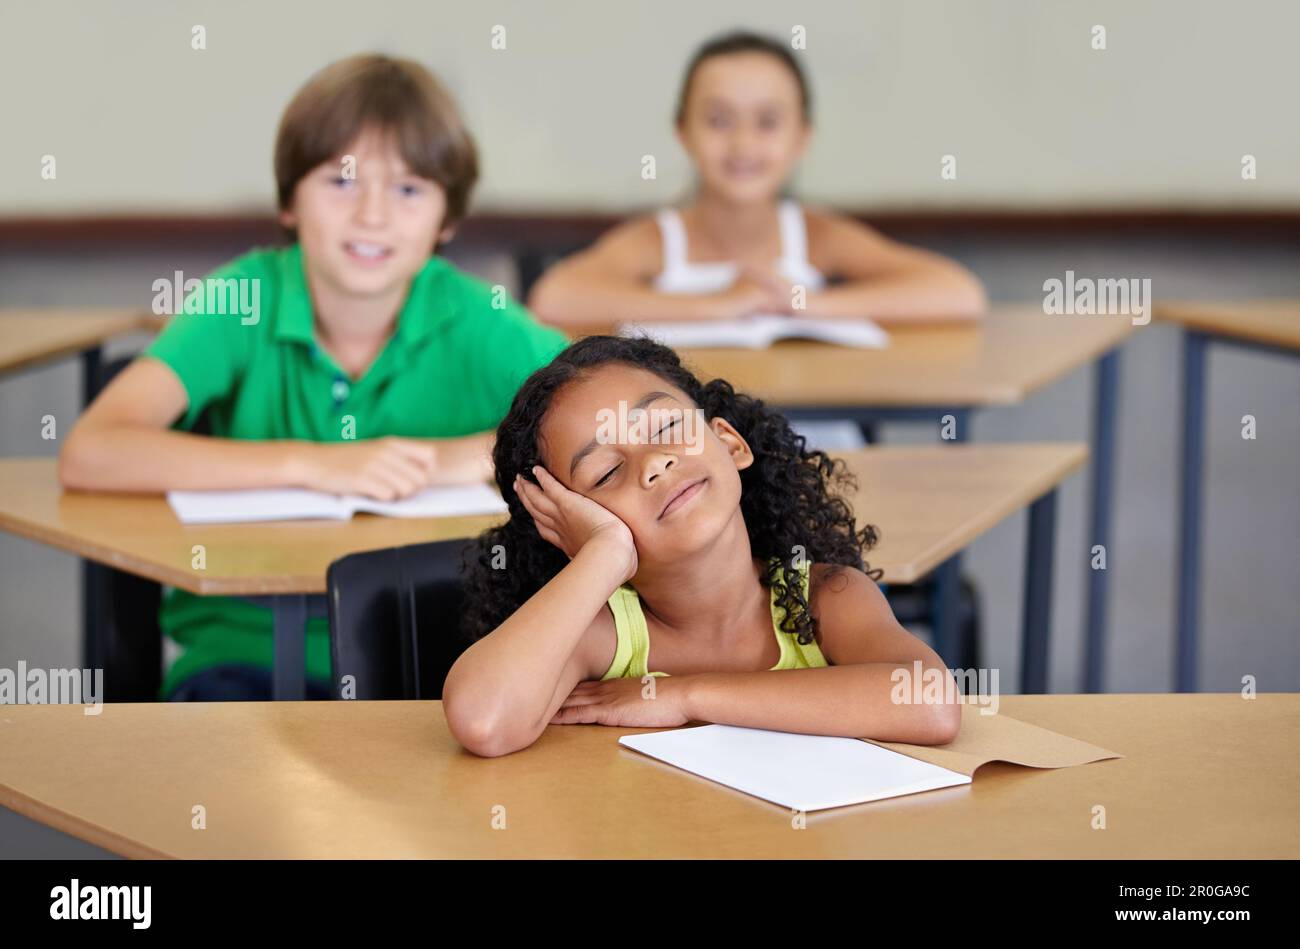 School is wearing her out. A bored looking ethnic girl sitting at her desk at school. Stock Photo